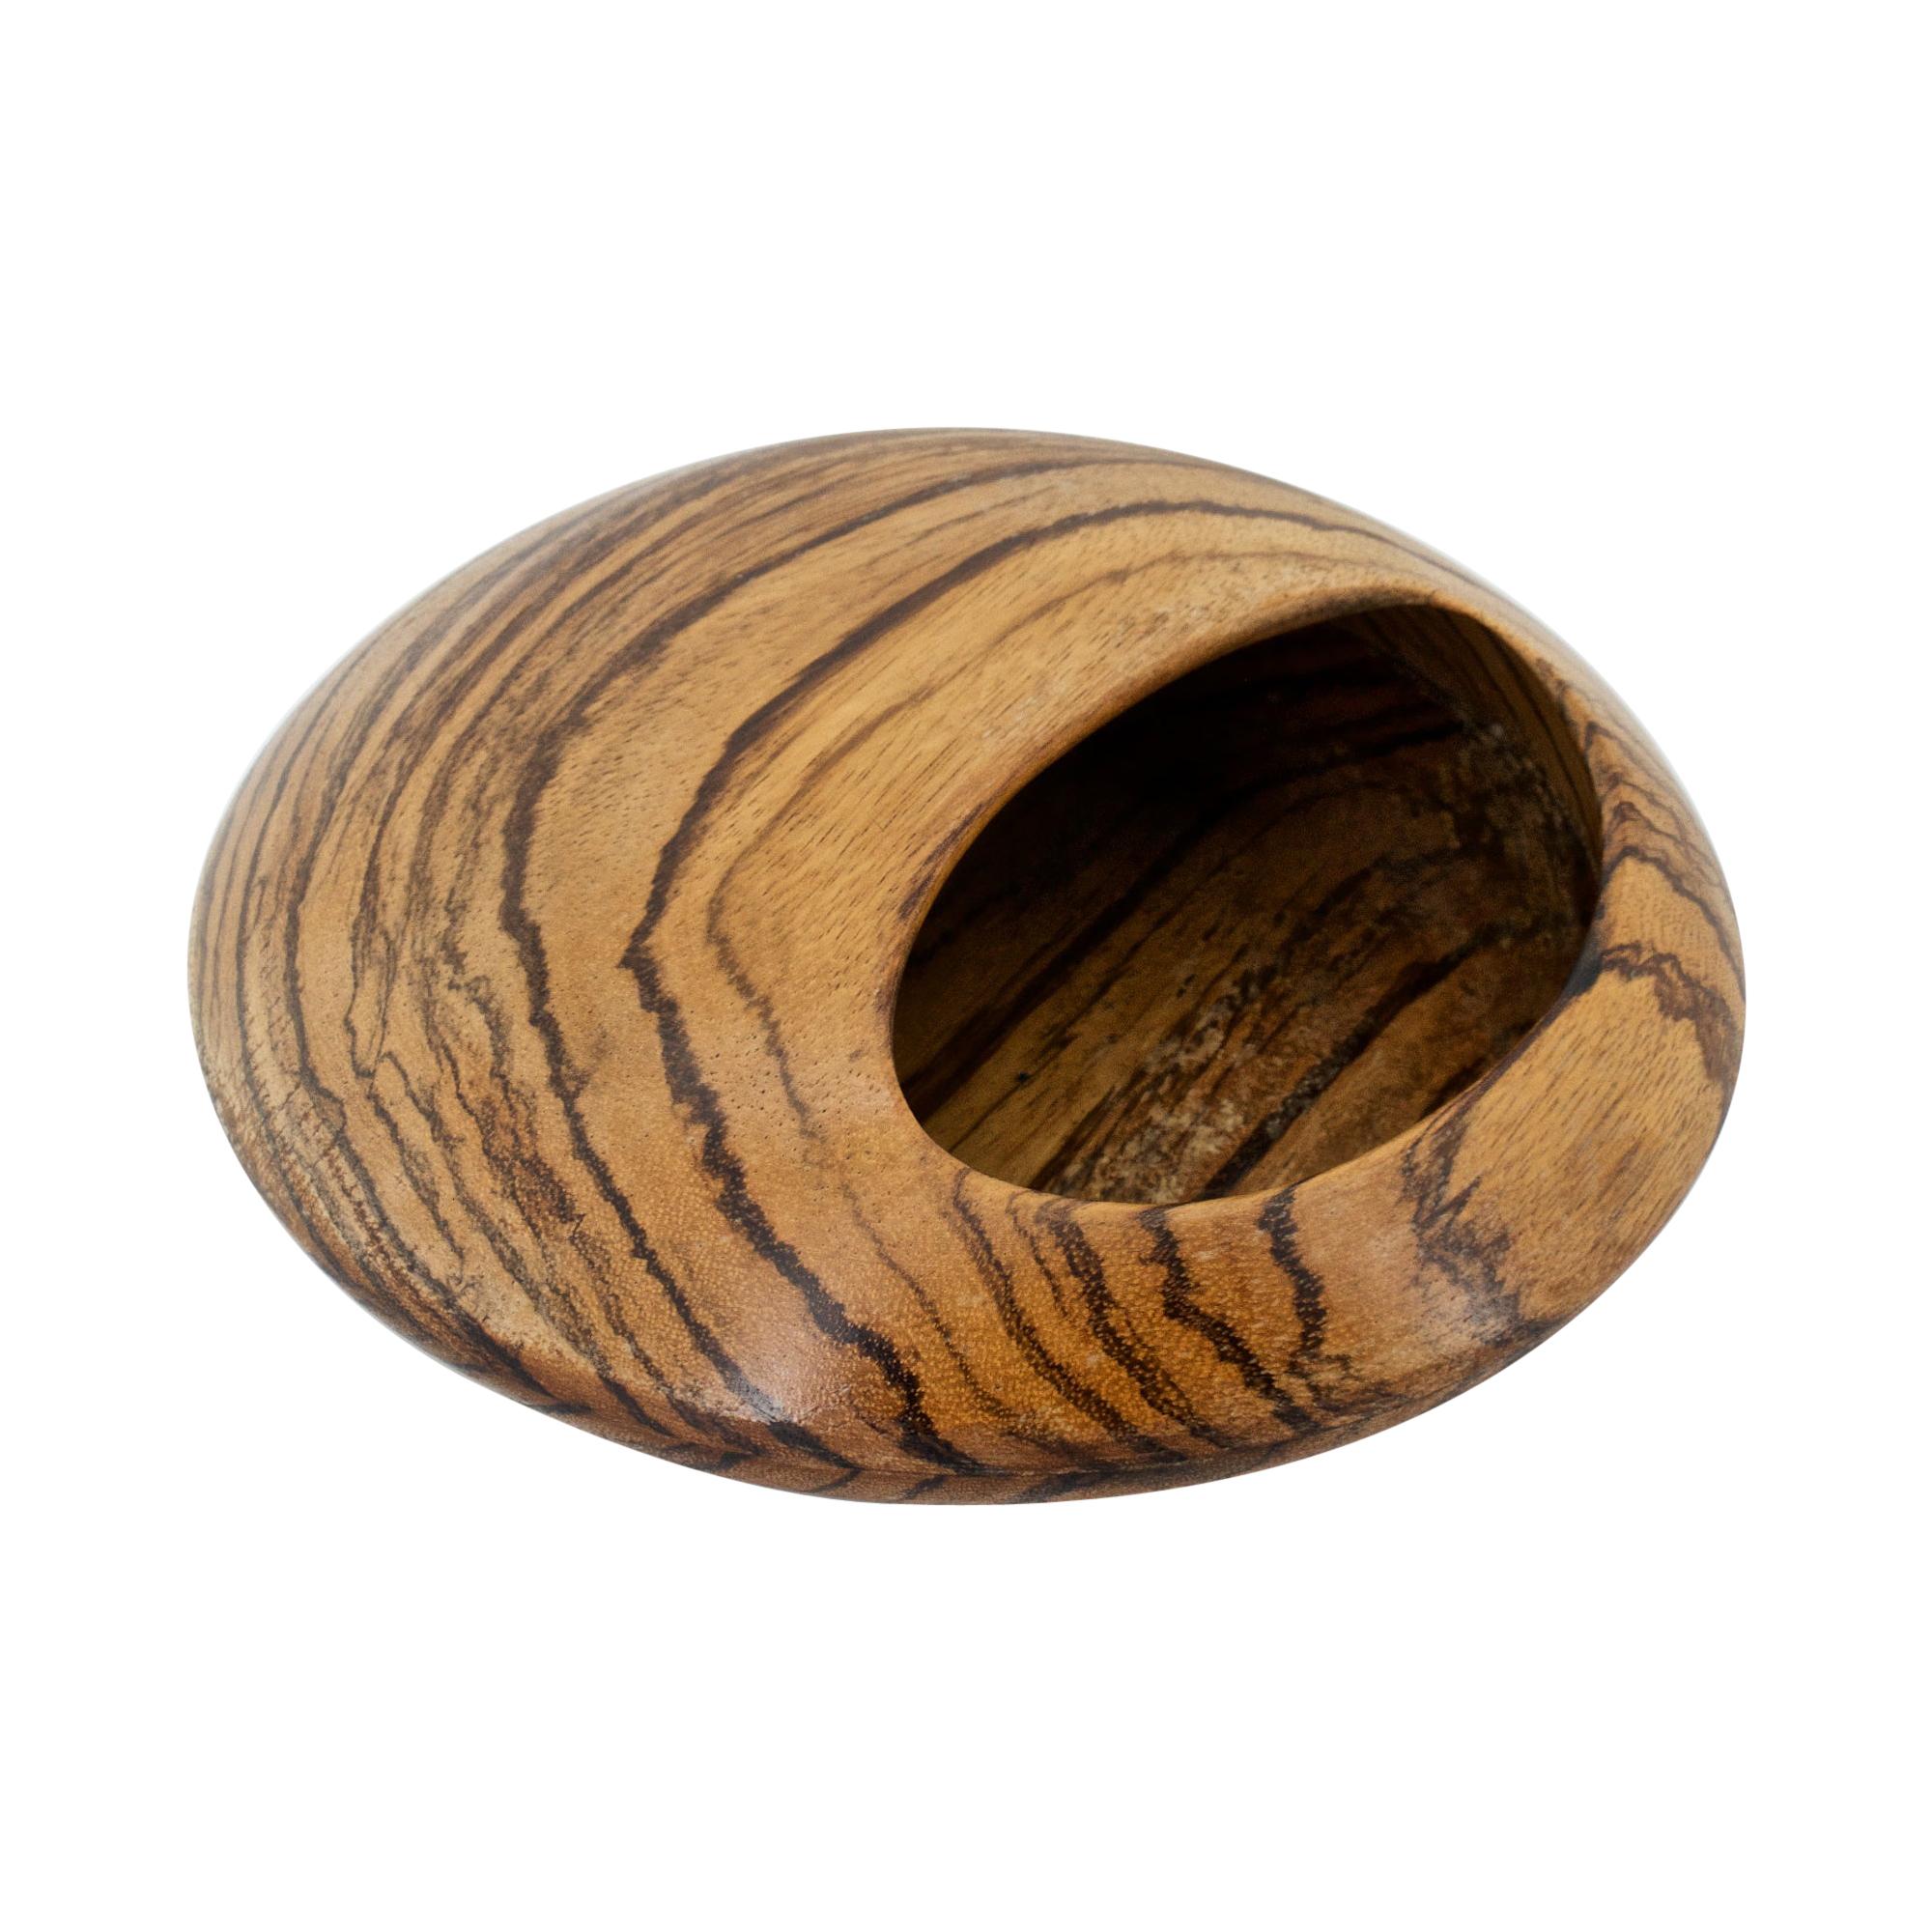 Wooden Mid Century sculpted orb lidded dish